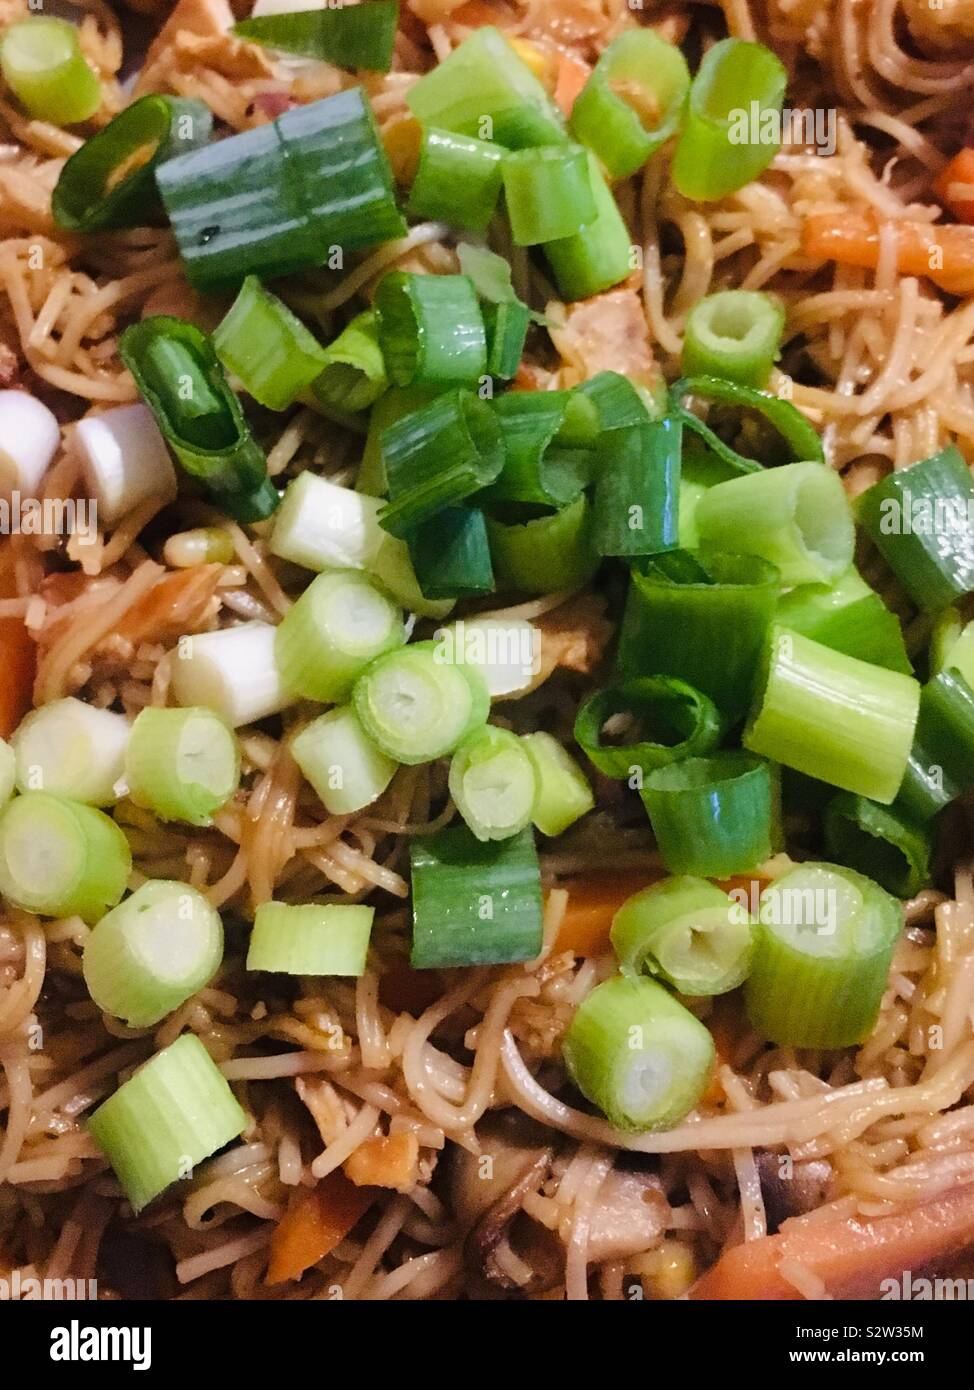 Stir fry with noodles, chicken and scallions / spring onions Stock Photo